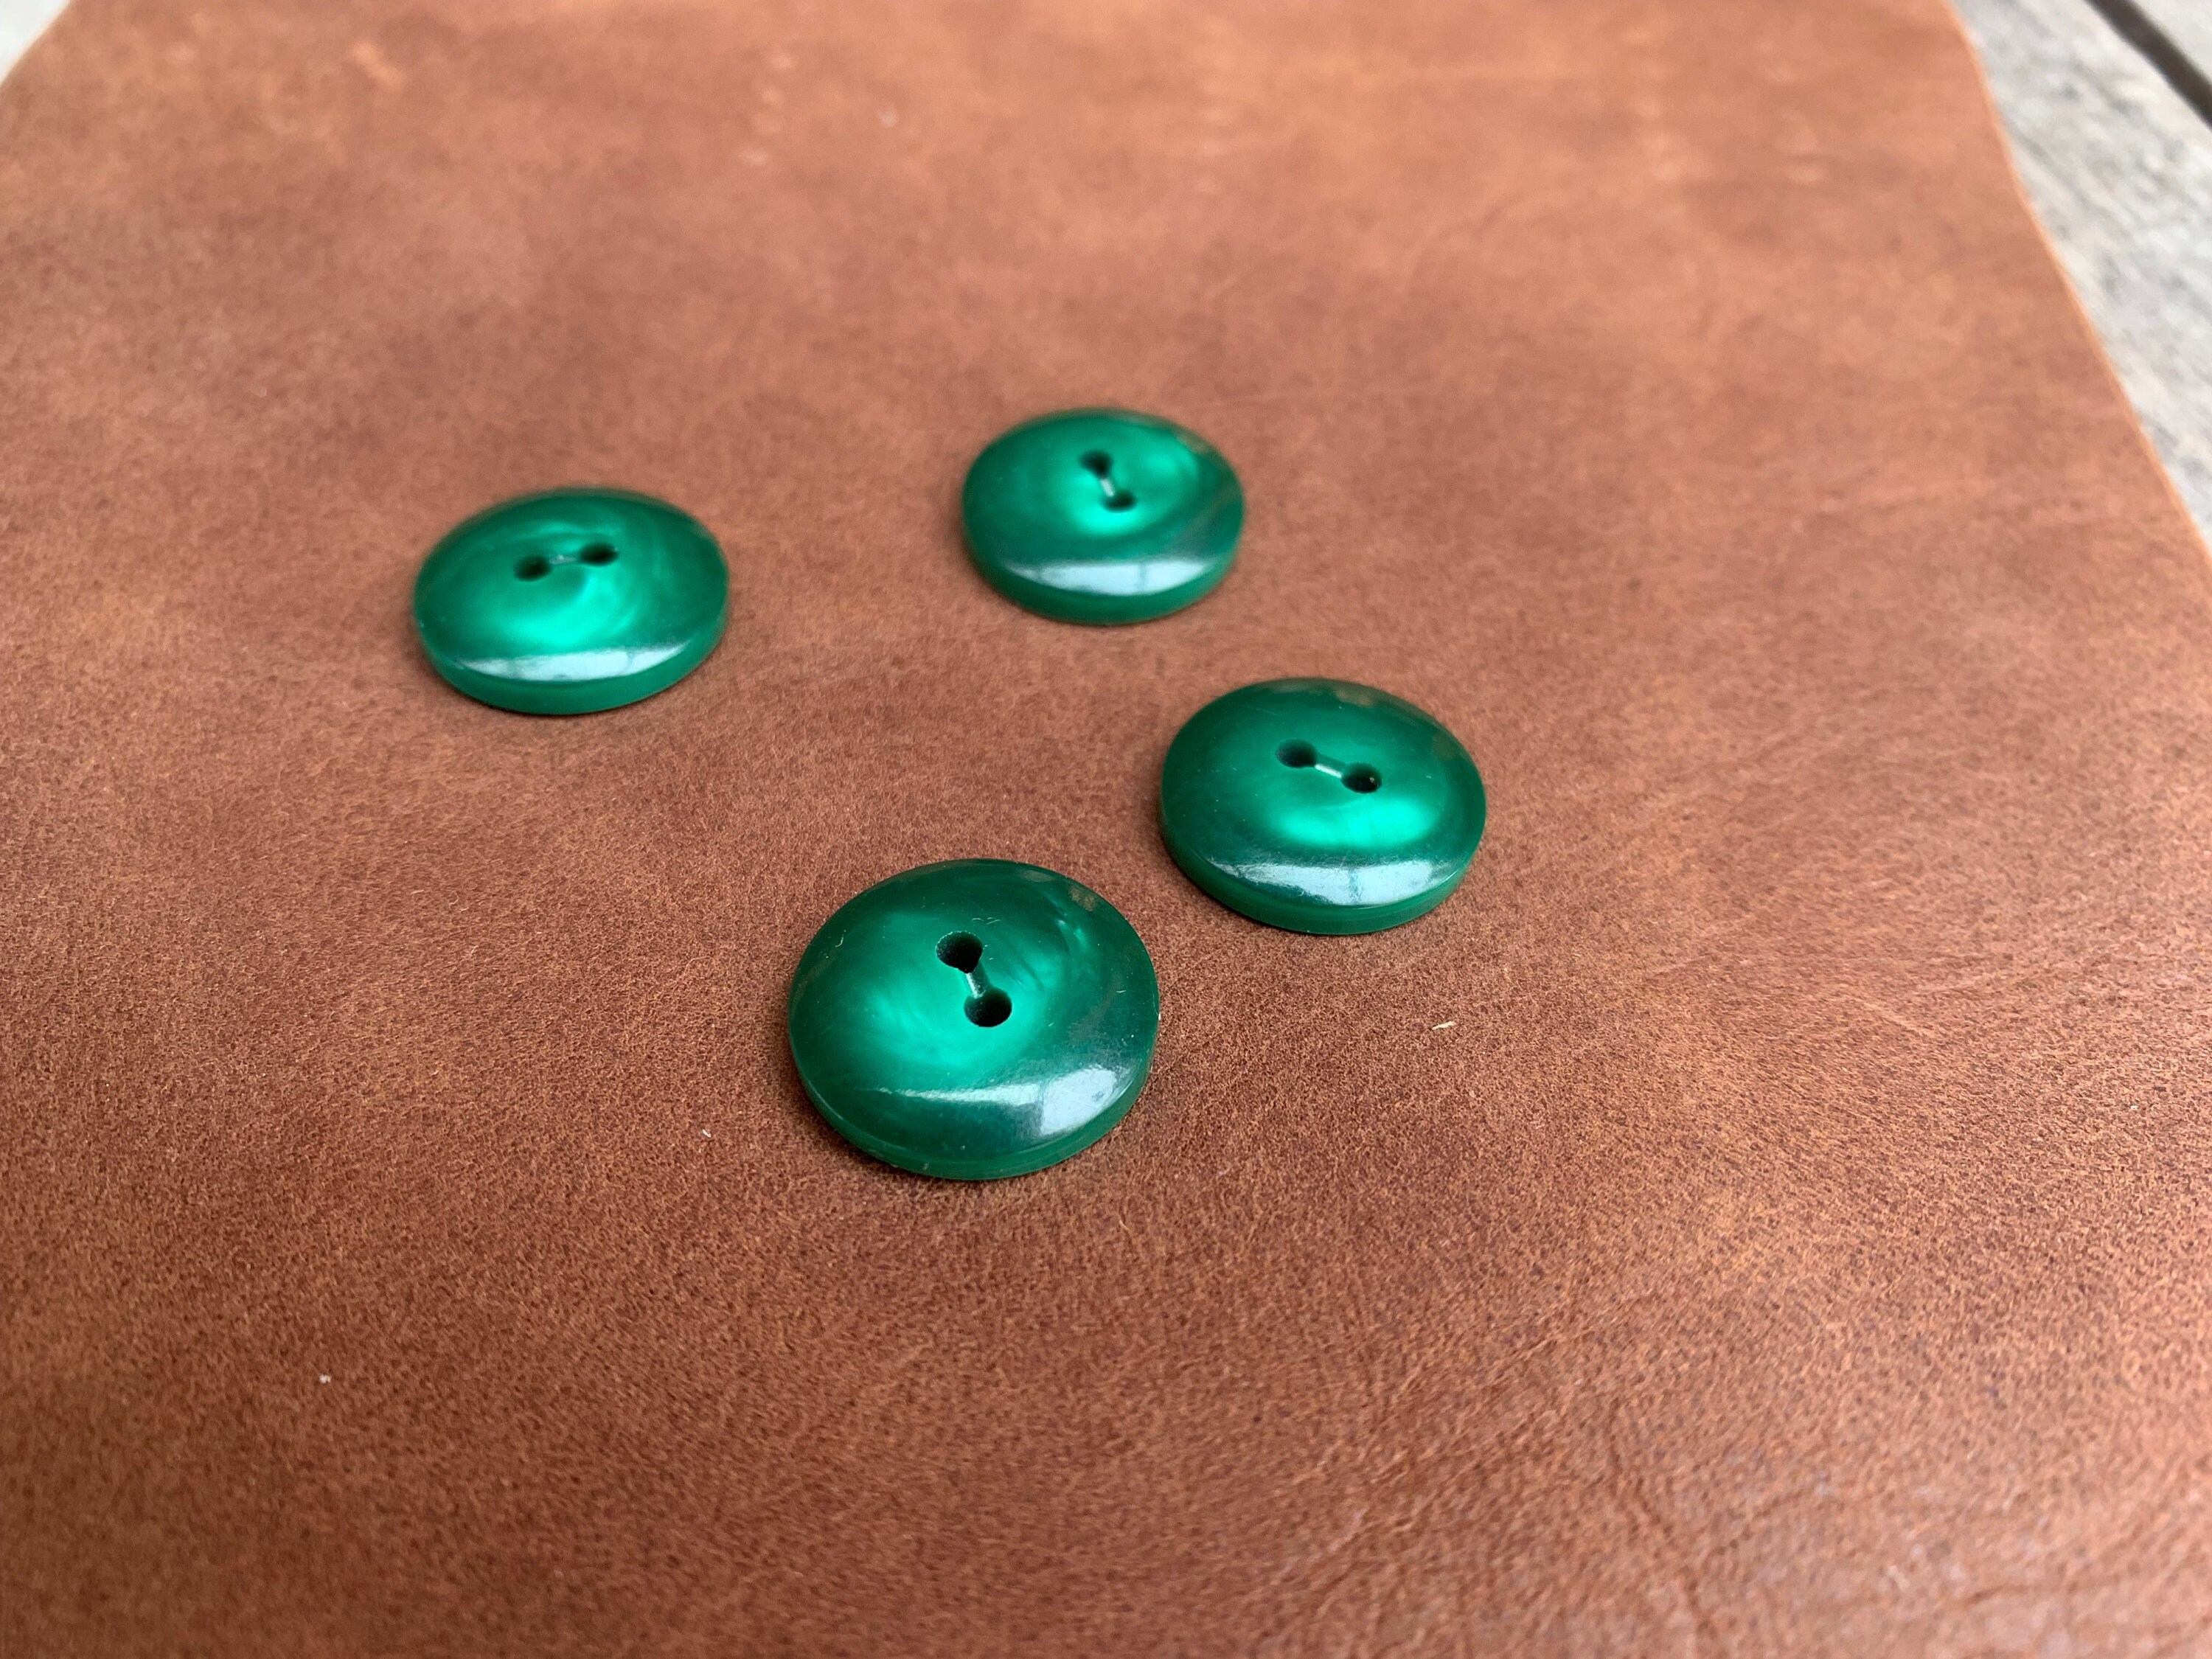 Olive Buttons Olive Suit Buttons Olive Coat Buttons Olive Pant Buttons Lot  of 4 Buttons, 3 Sizes Available, 